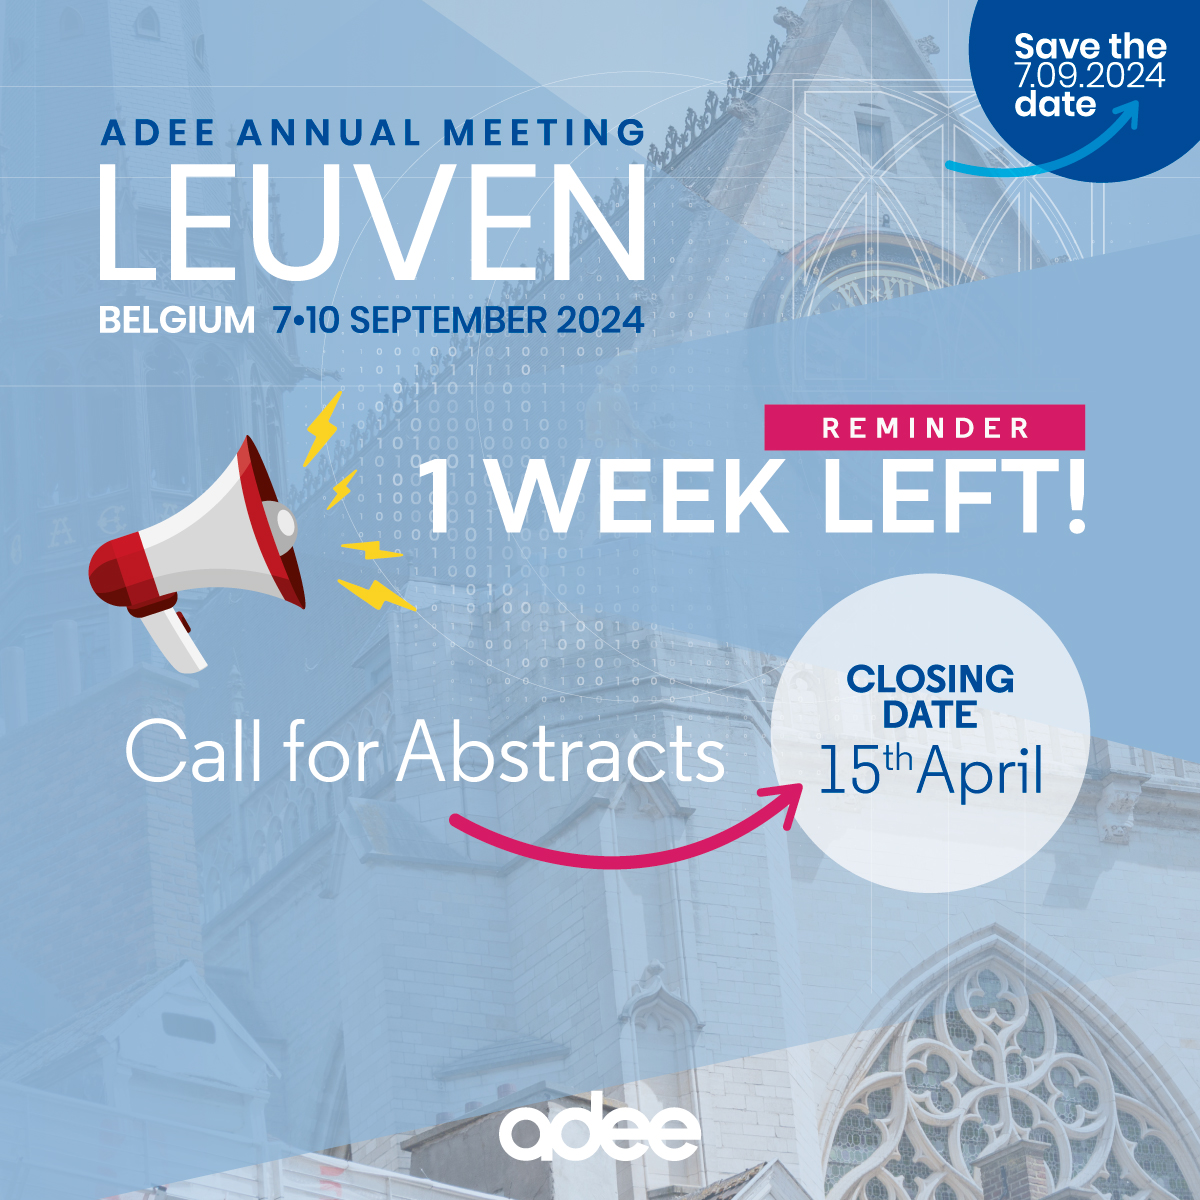 📢 Time's ticking! Just ONE week left to submit your abstracts for ADEE 2024 Leuven! Seize the opportunity and send in your abstracts by April 15th through our online portal. Don't miss out! adee.org/meetings/leuve… #Adee #Leuven2024 #AdeeAnnualMeeting #callforabstracts